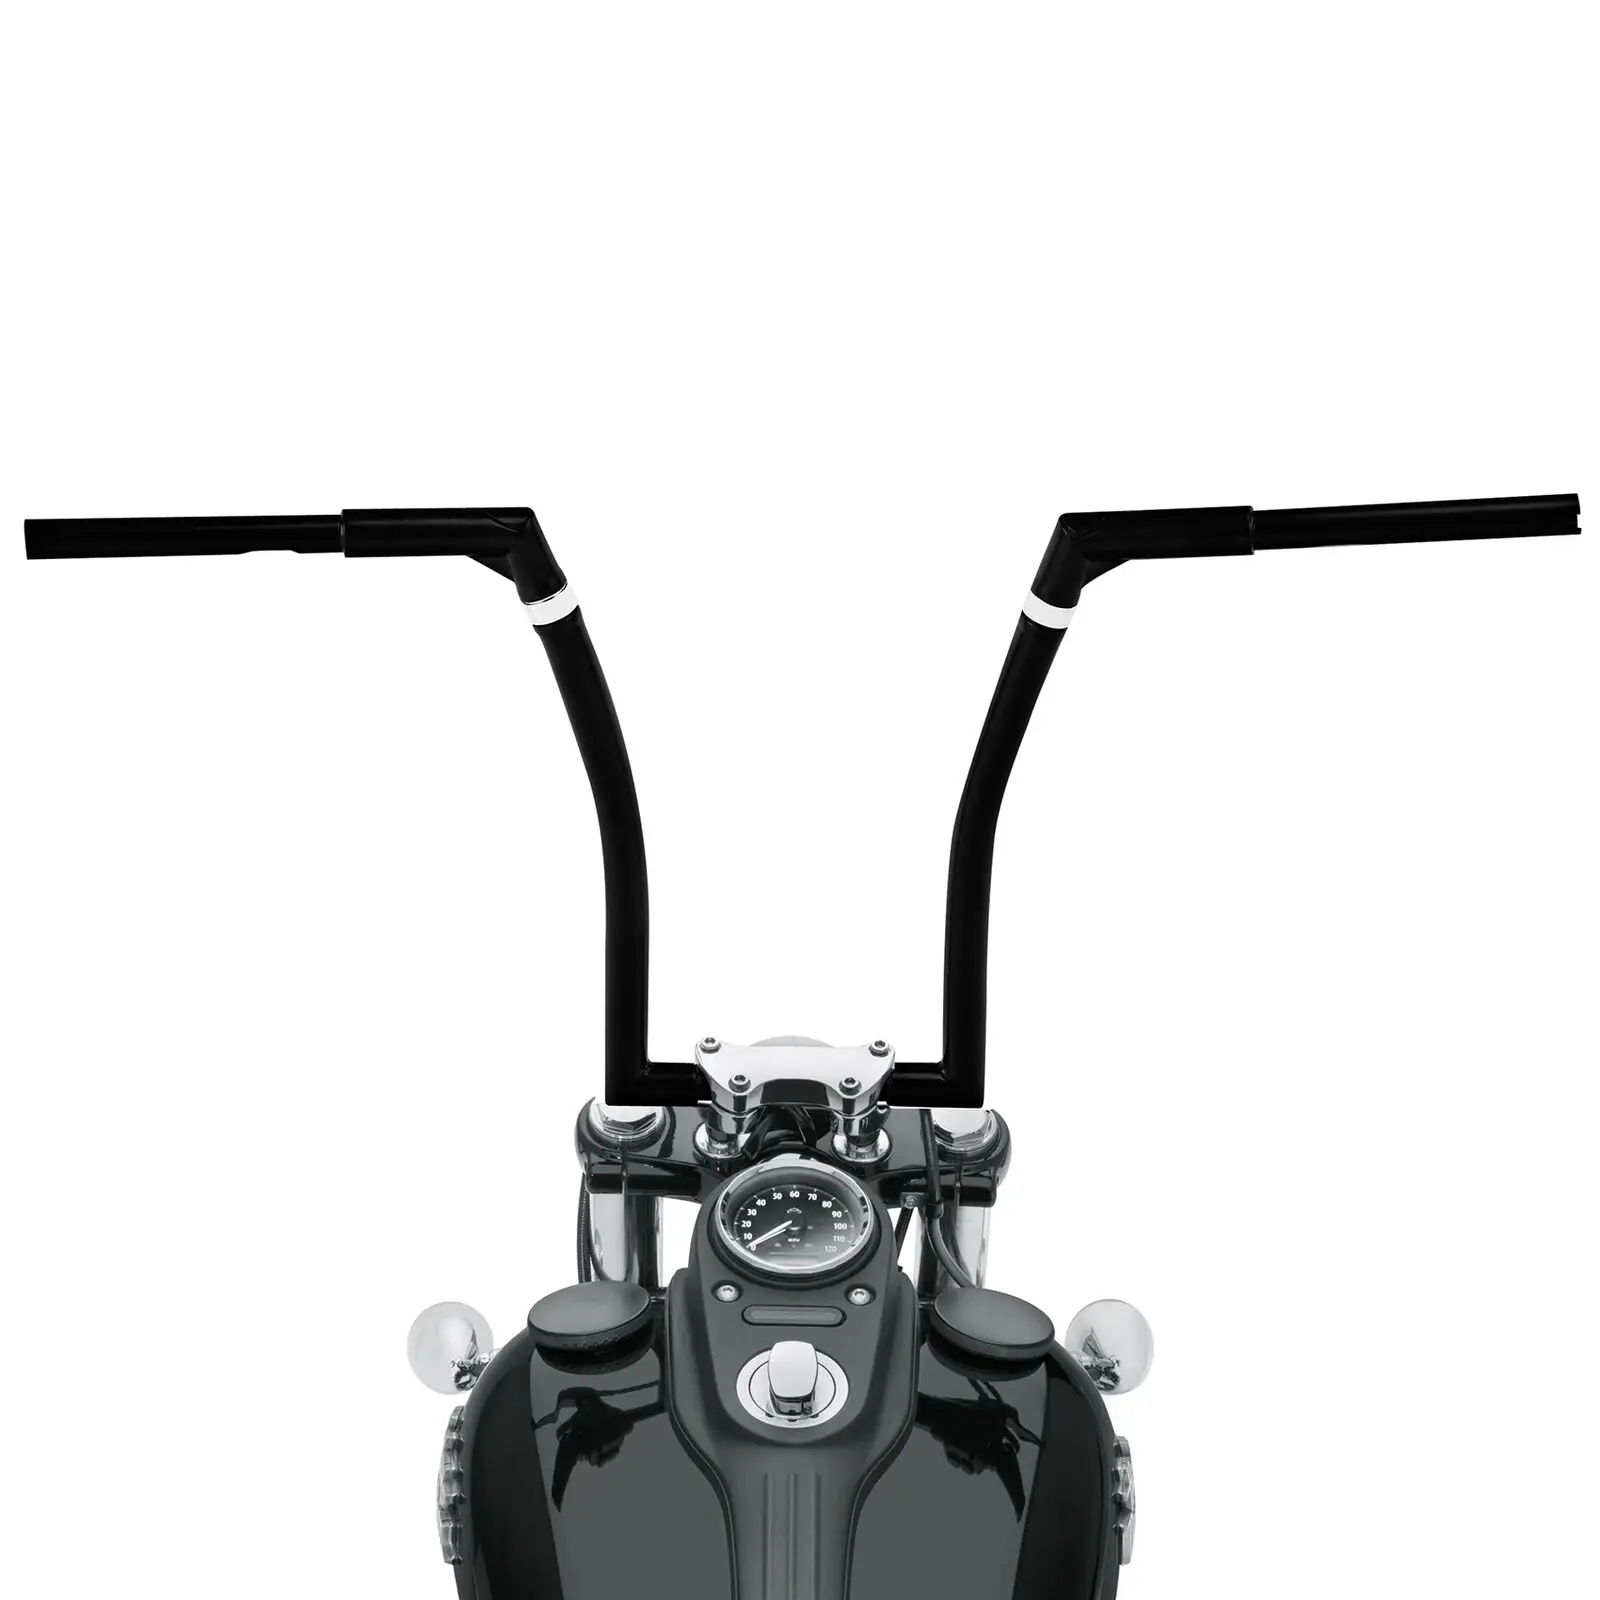 

Motorcycle 18" Rise 1-1/4" Ape Hanger Handlebar For Harley FLST FXST Sportster XL Forty-Eight XL Dyna Low Rider